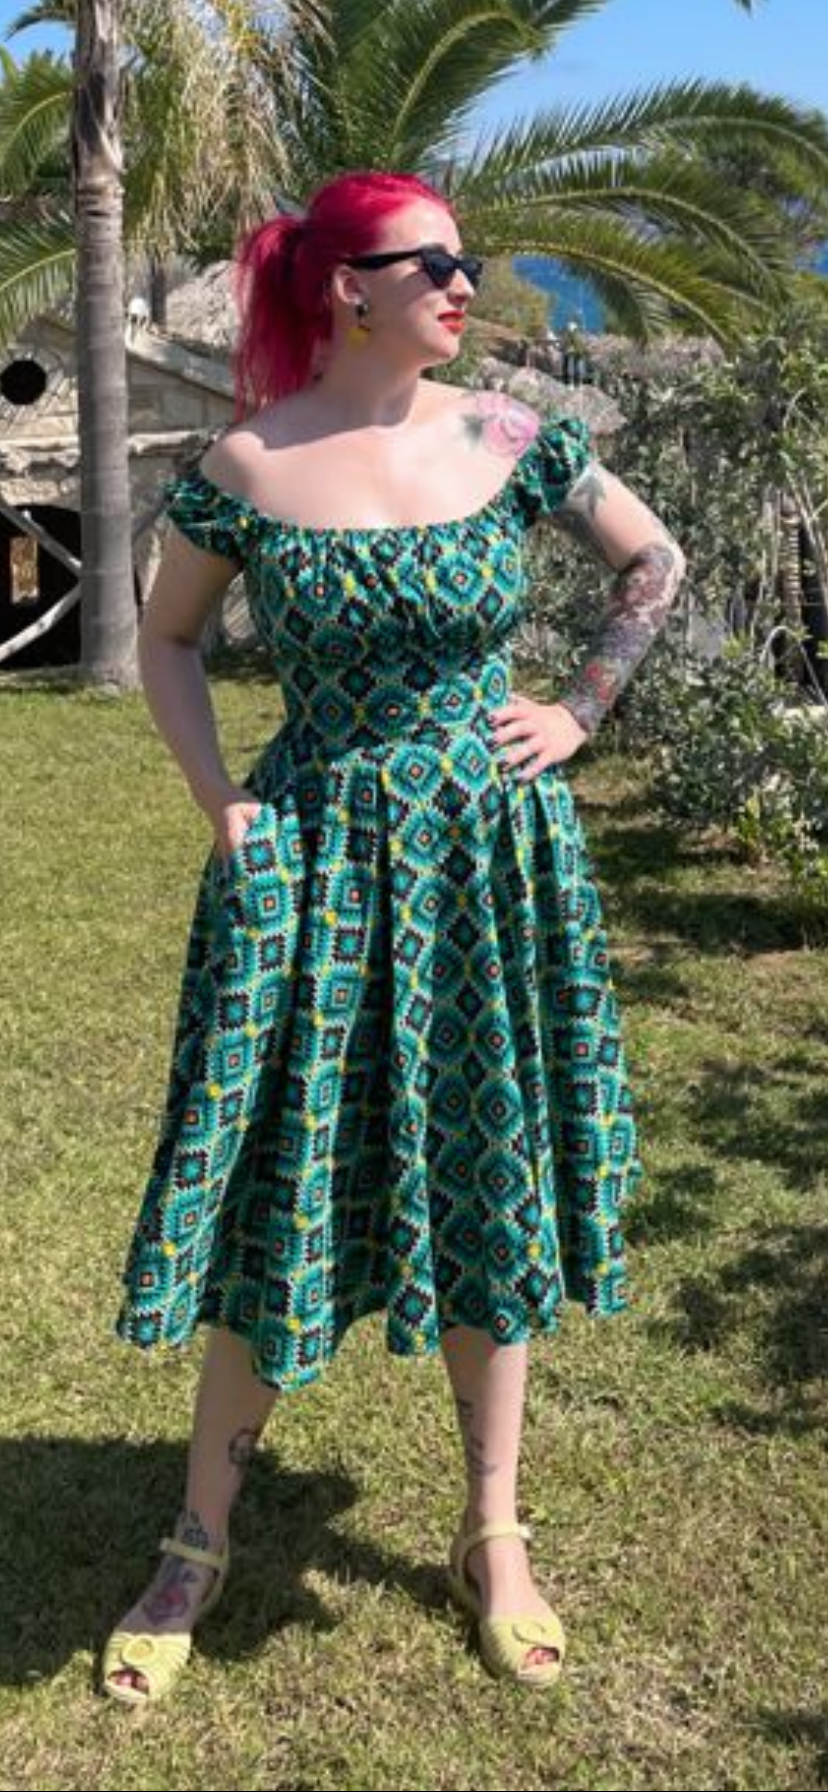 Vintage 1950s style turquoise Aztec print full circle gypsy dress S to 3XL